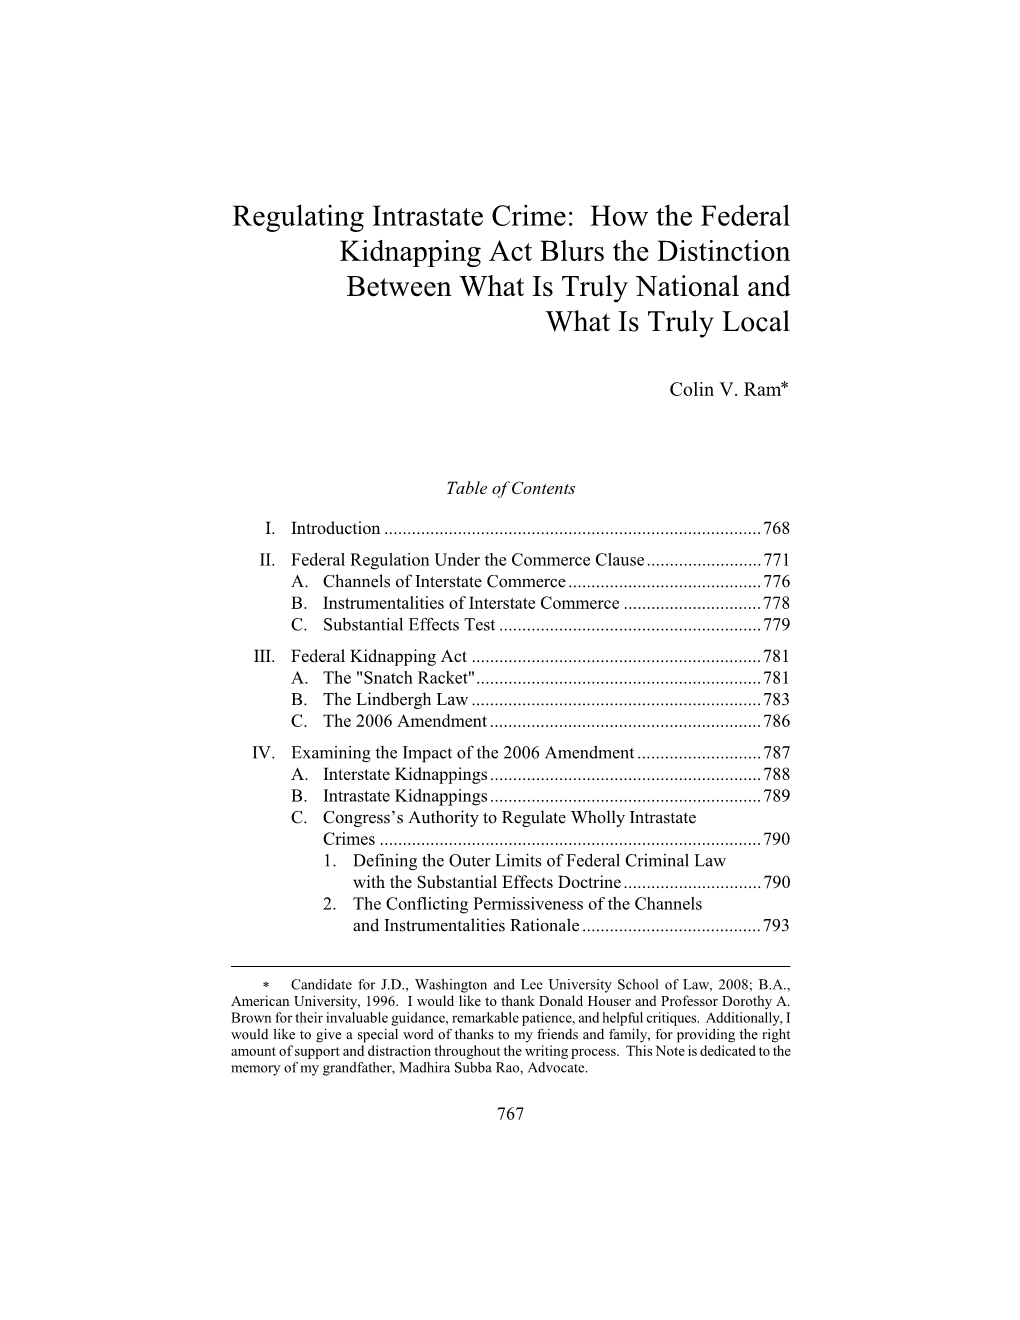 Regulating Intrastate Crime: How the Federal Kidnapping Act Blurs the Distinction Between What Is Truly National and What Is Truly Local